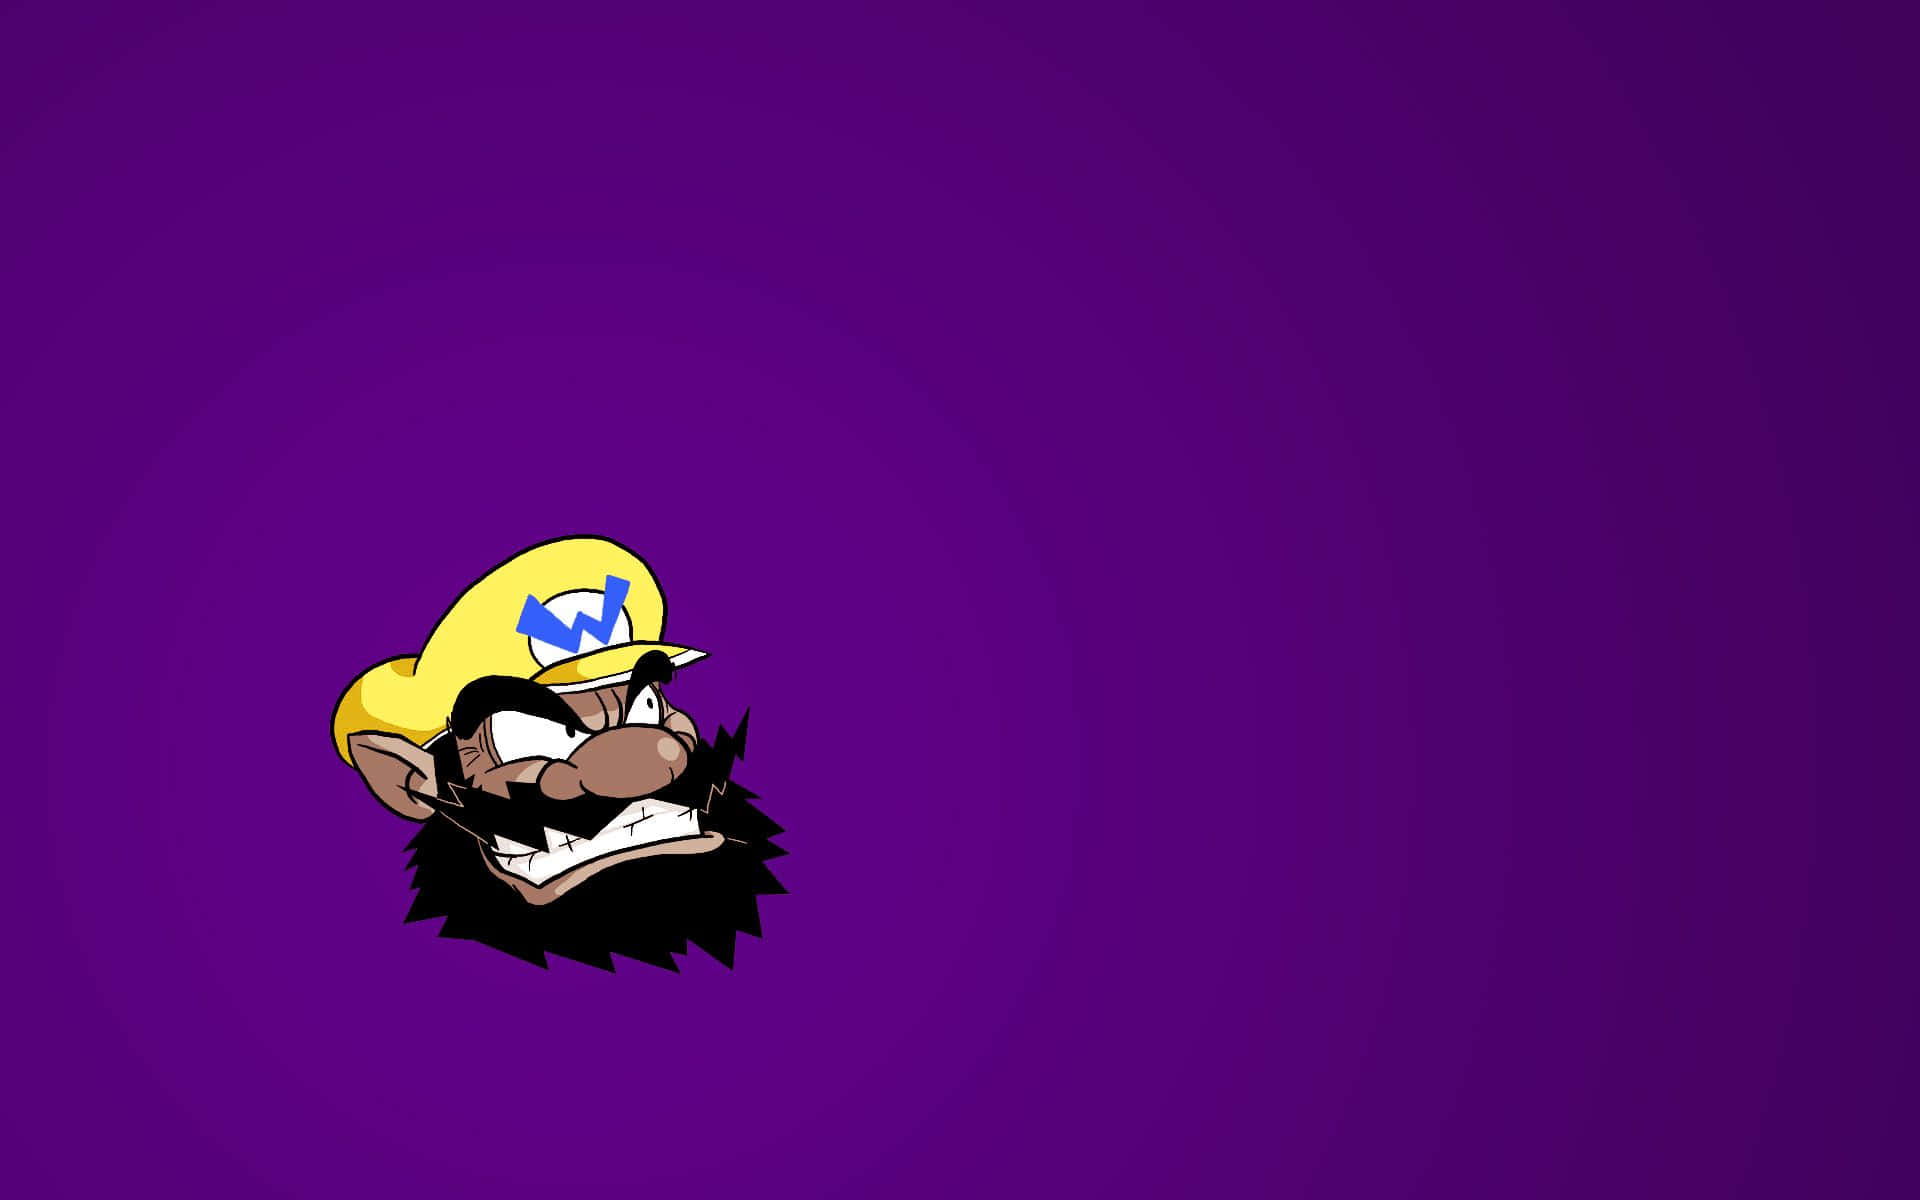 Wario Strikes A Pose In His Iconic Outfit